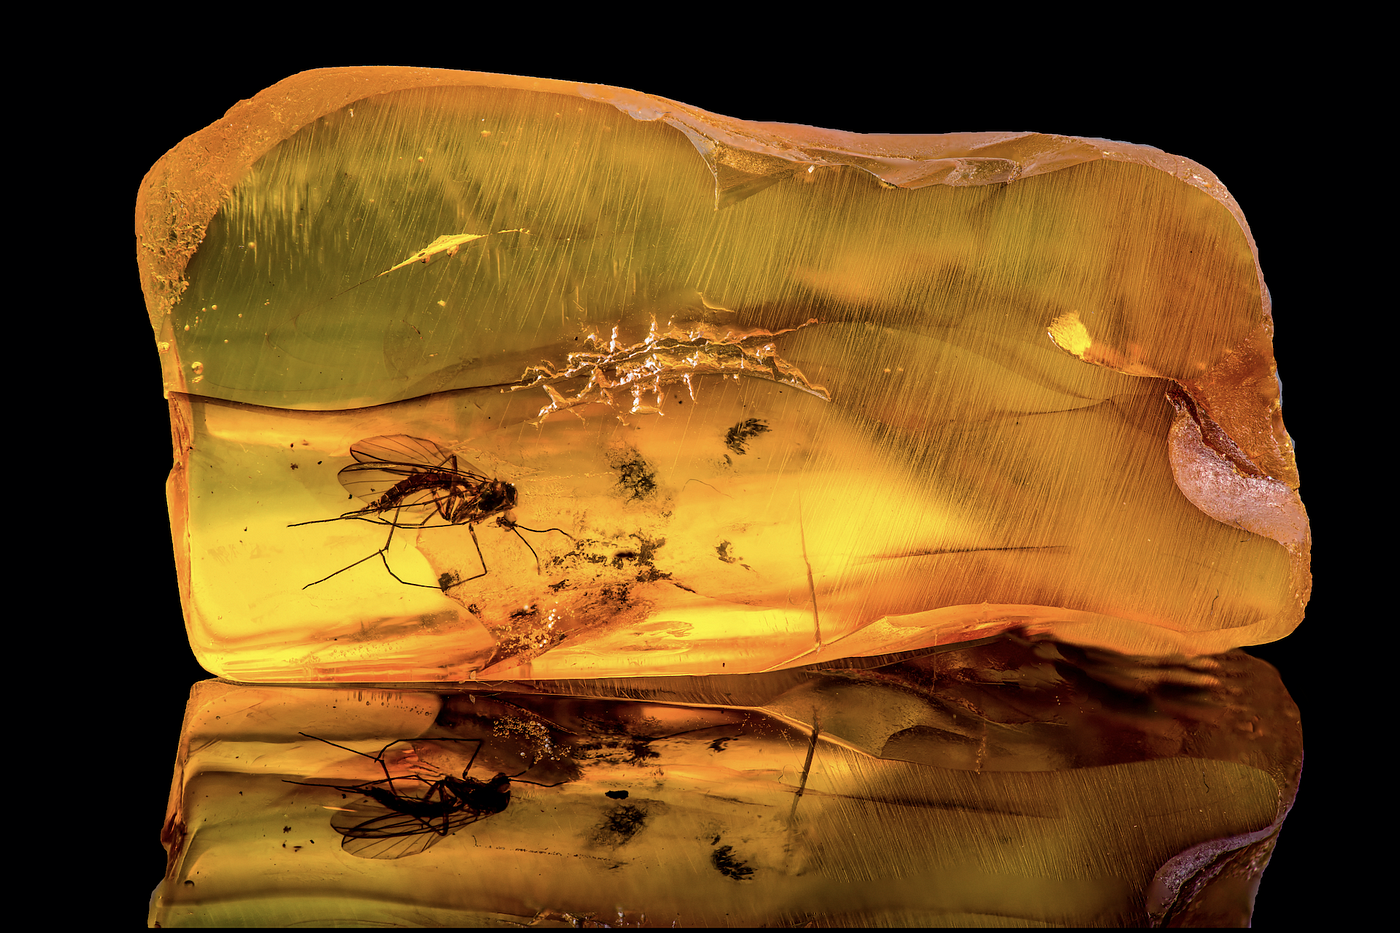 Mosquito trapped in amber, a reference to the movie Jurassic Park.